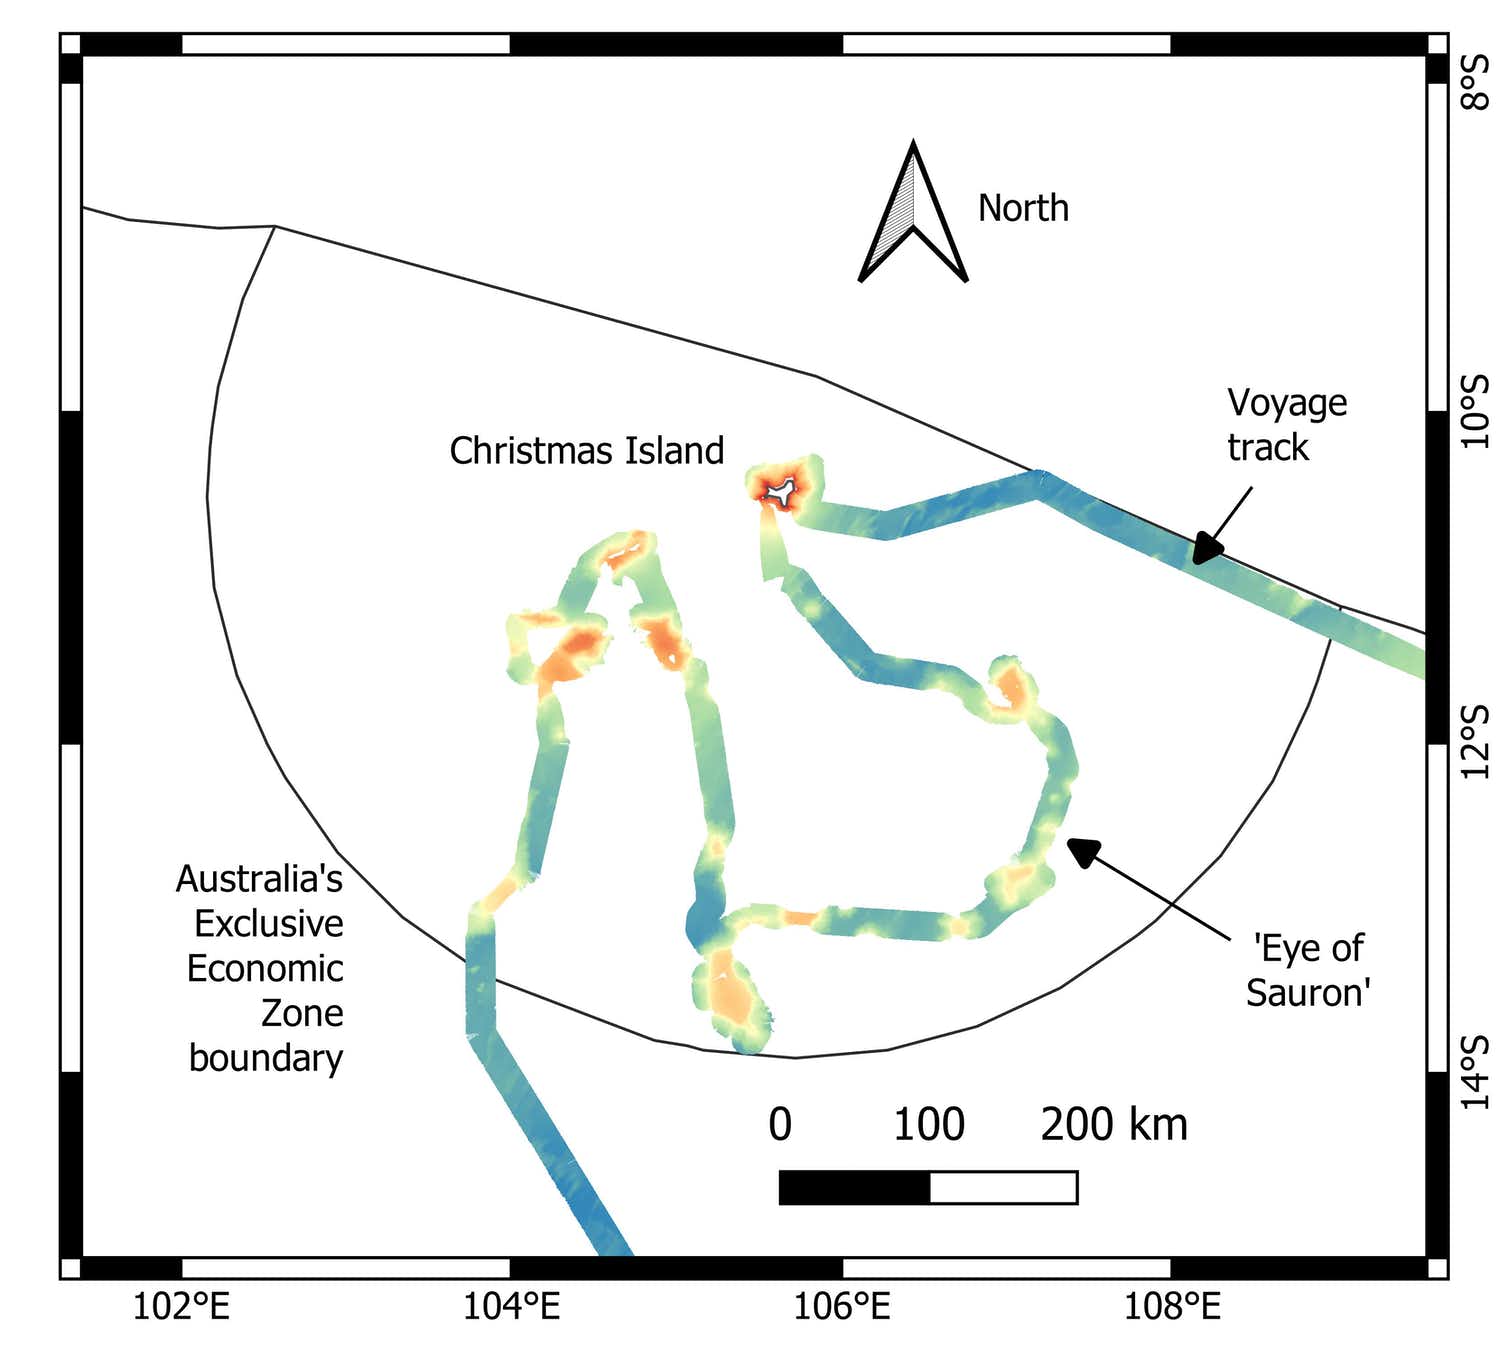 A diagram showing the voyage of the RV Investigator around Christmas Island